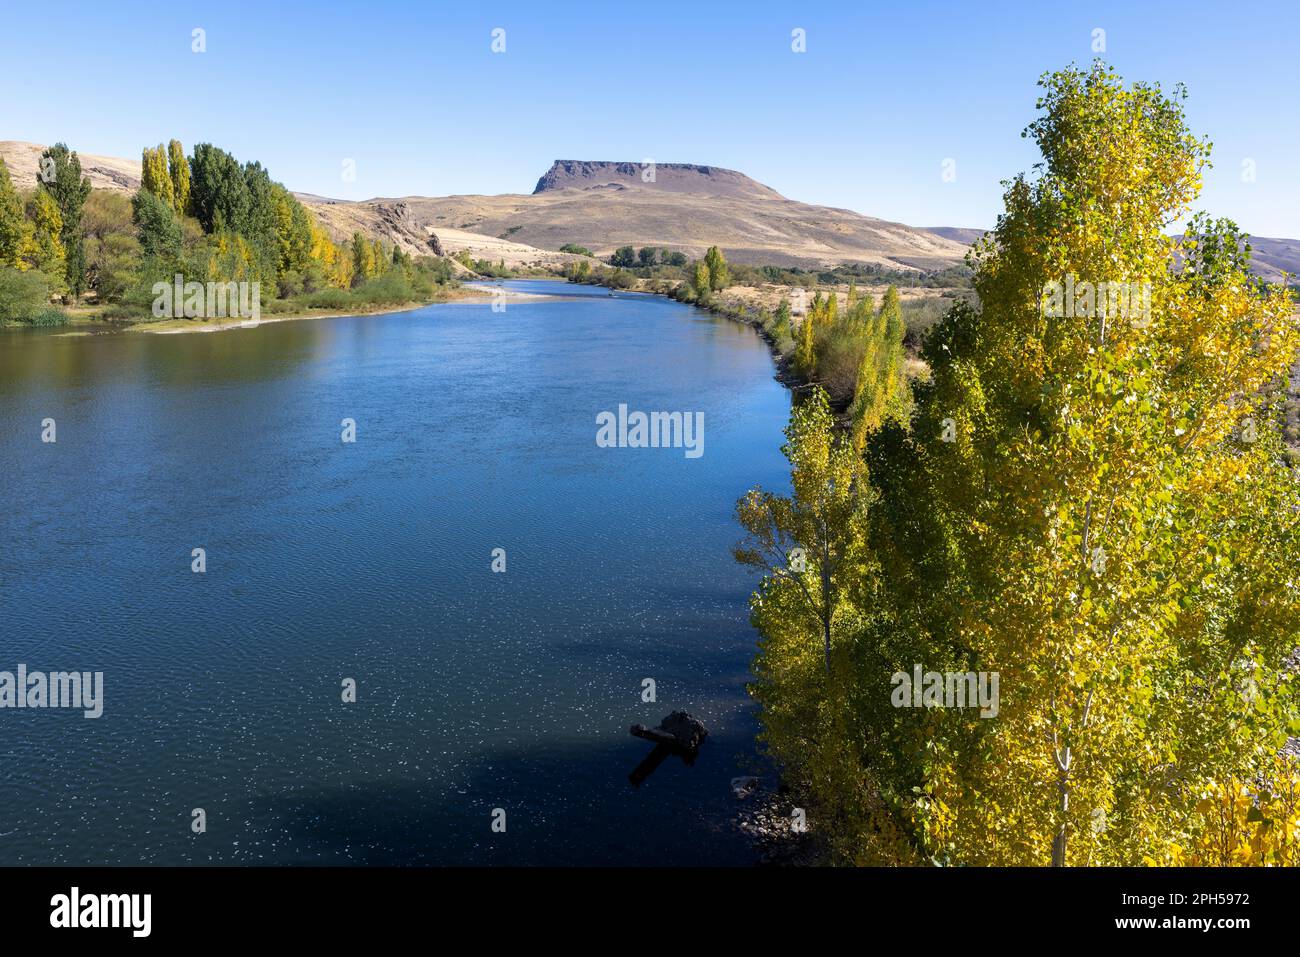 Collón Curá River and landscape in Argentina, South America Stock Photo